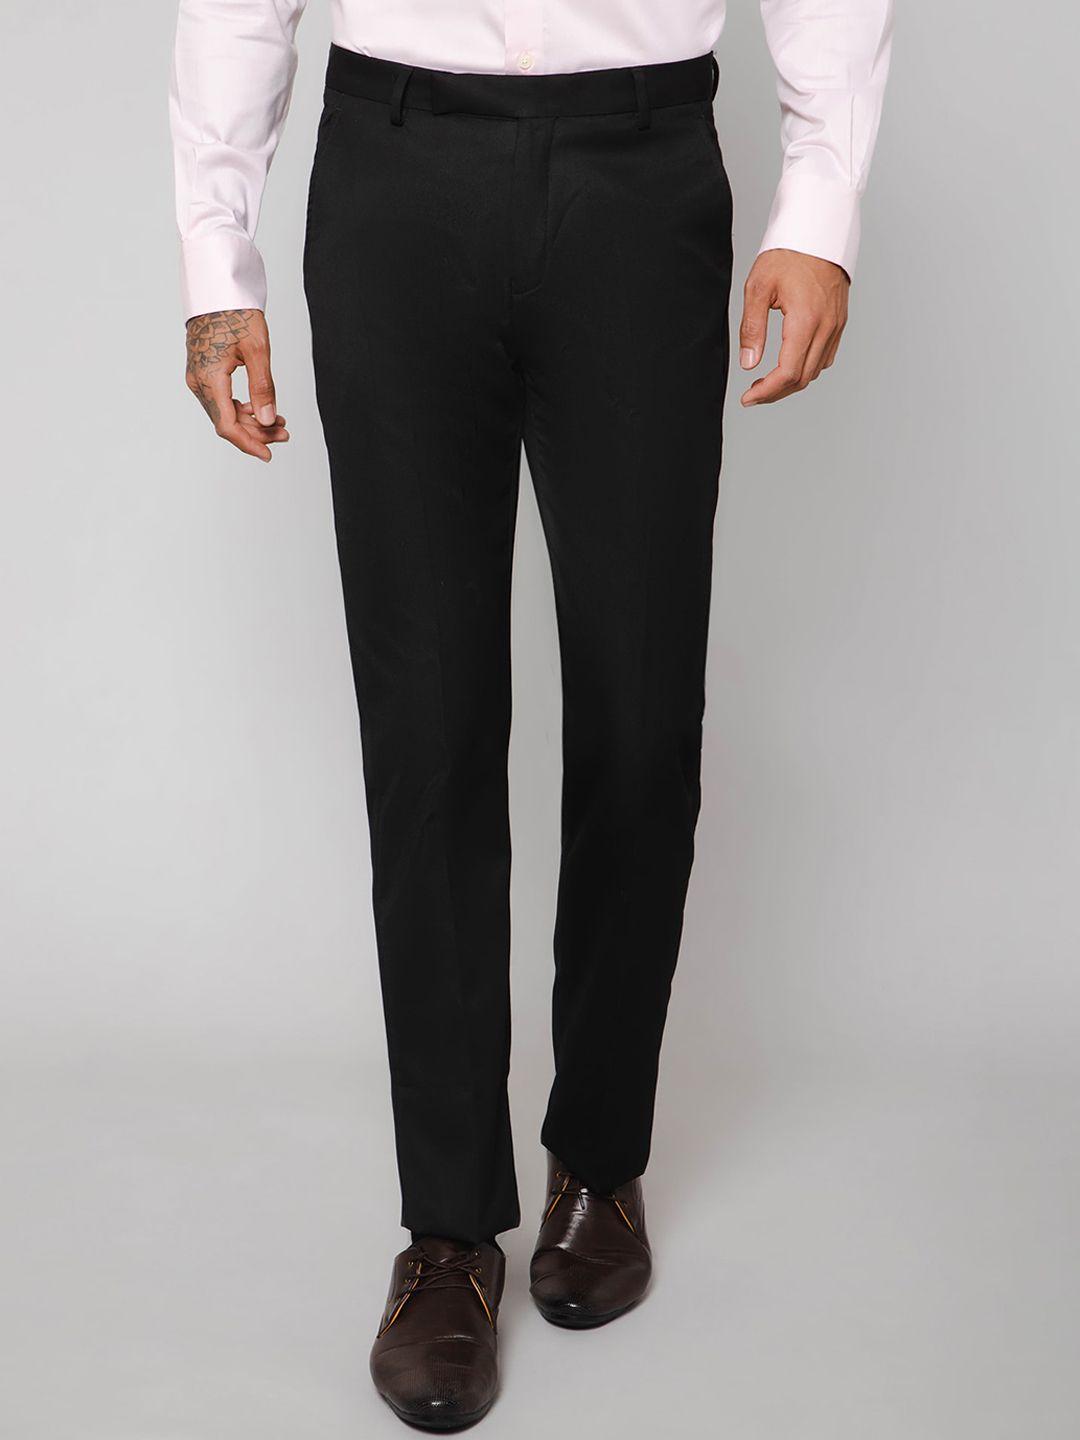 cantabil men easy wash formal trousers